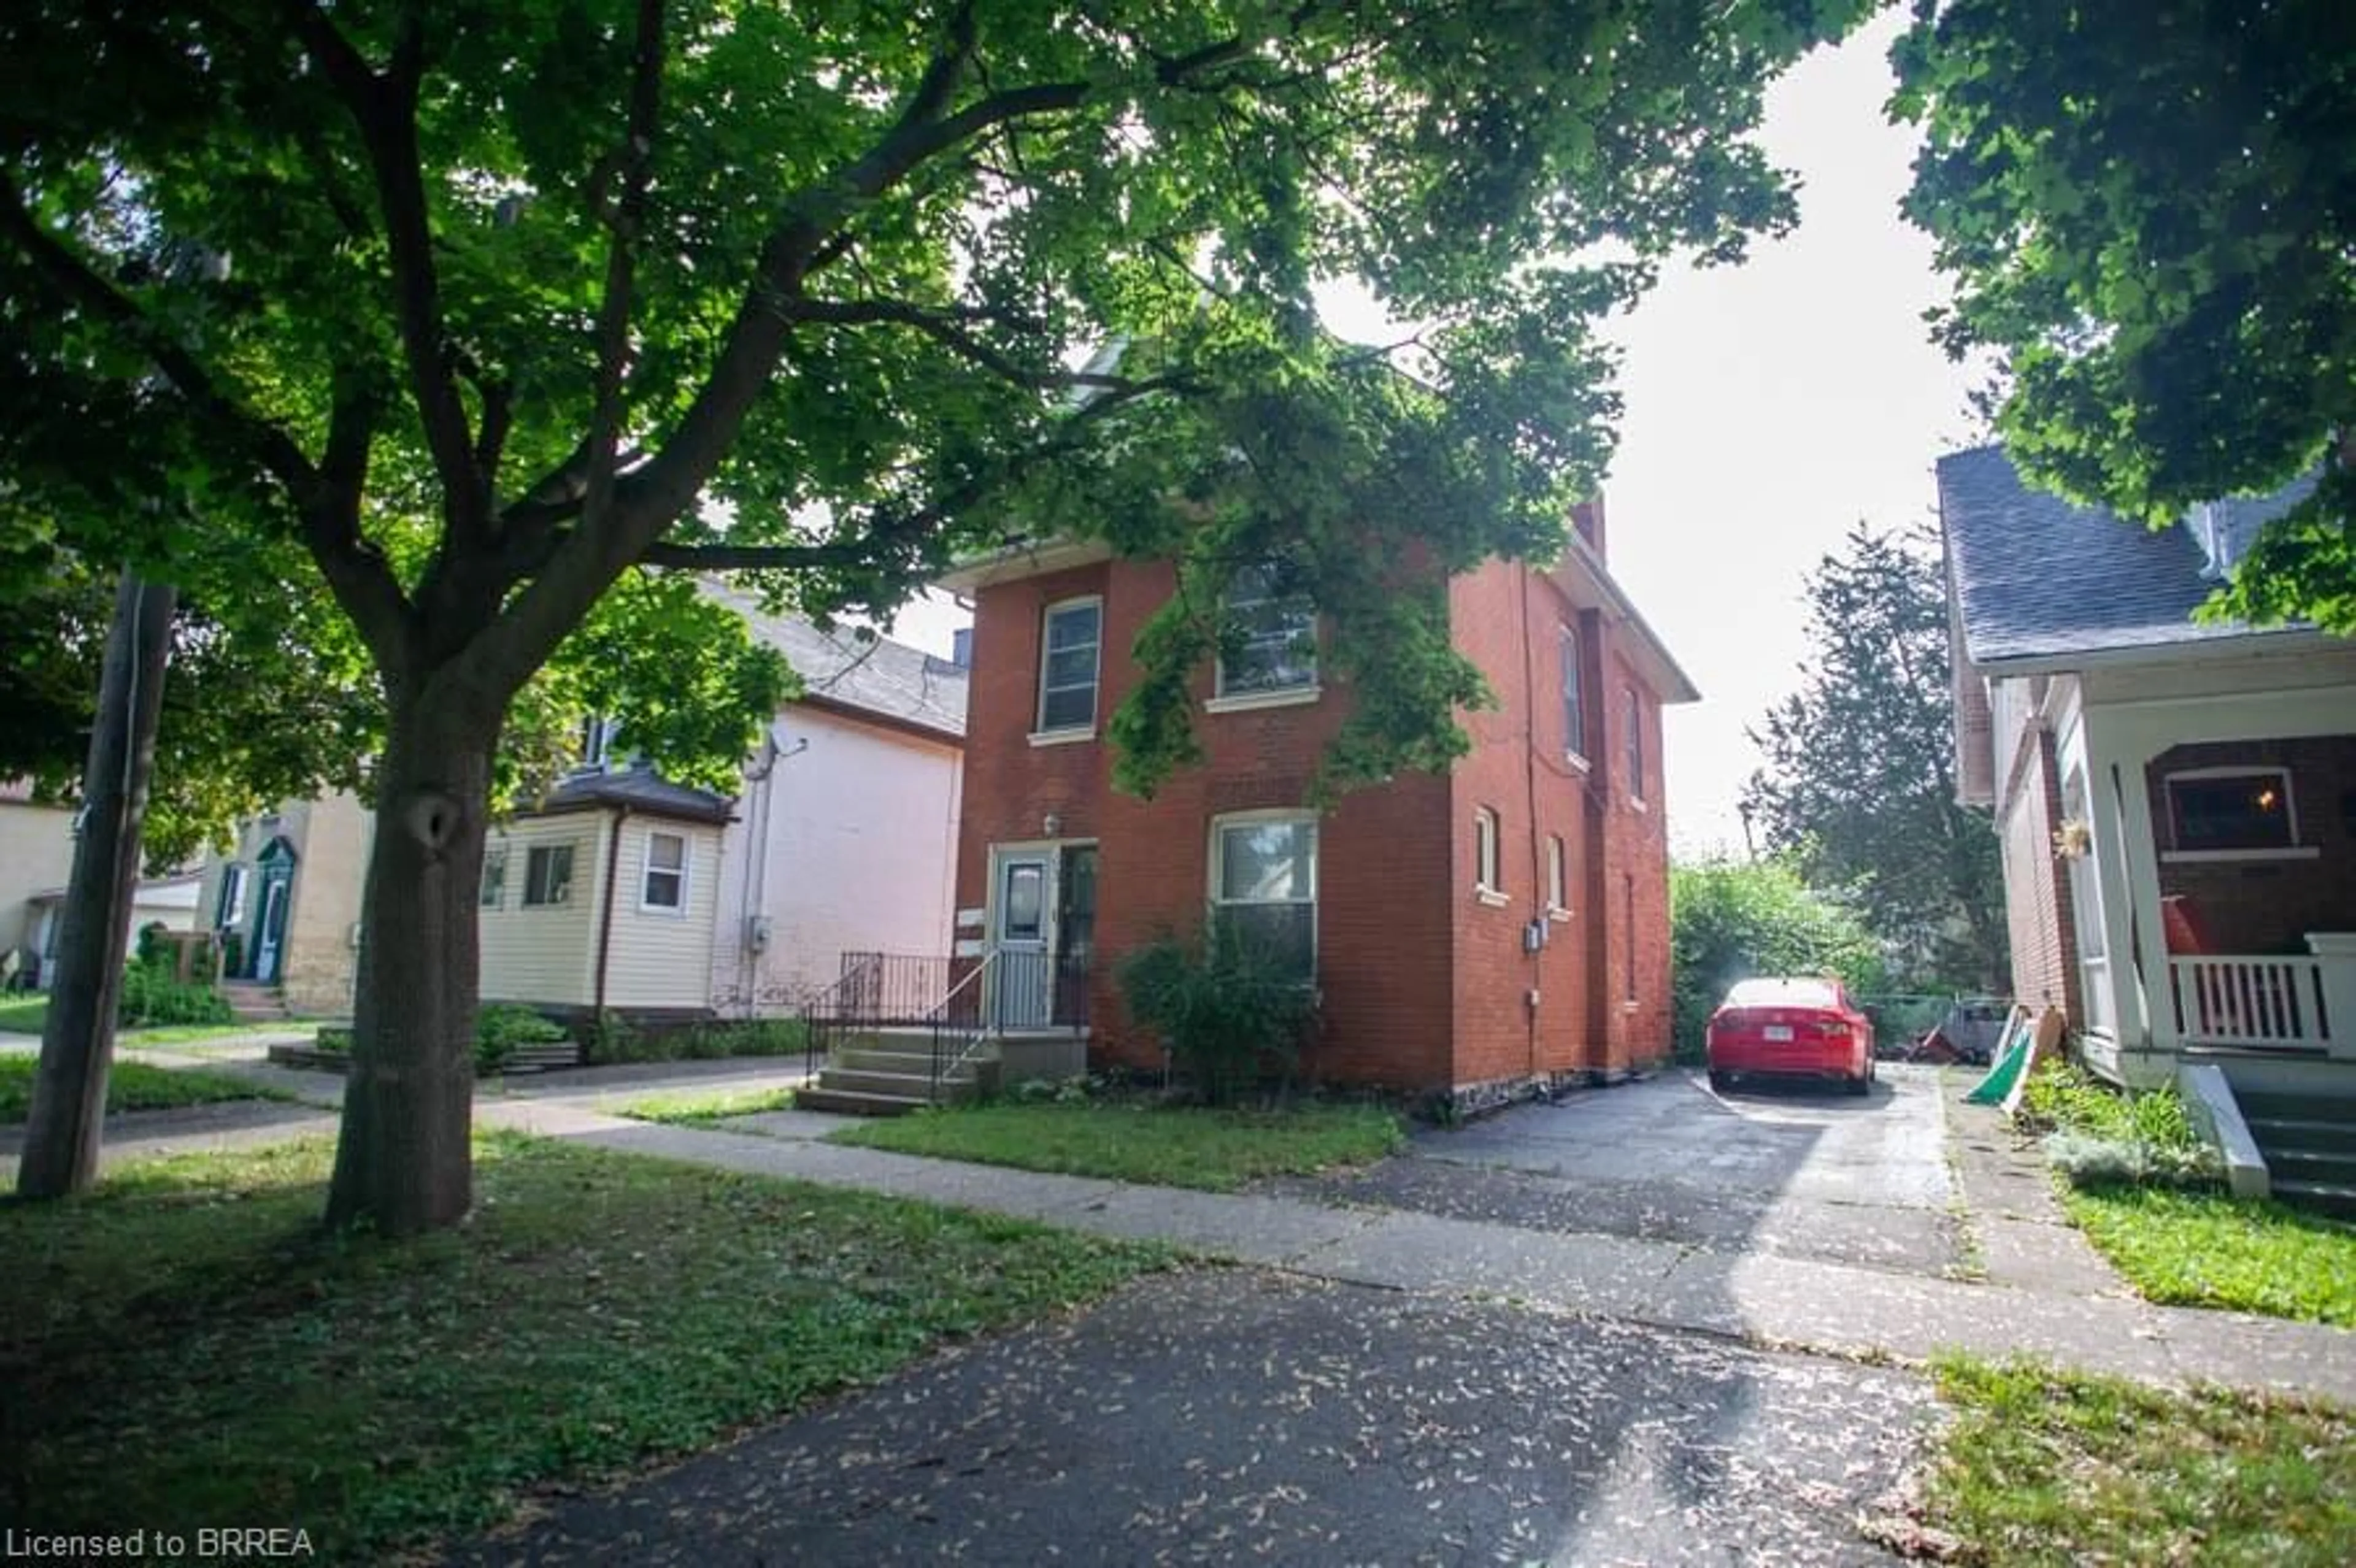 Street view for 113 Eagle Ave, Brantford Ontario N3S 1Z6